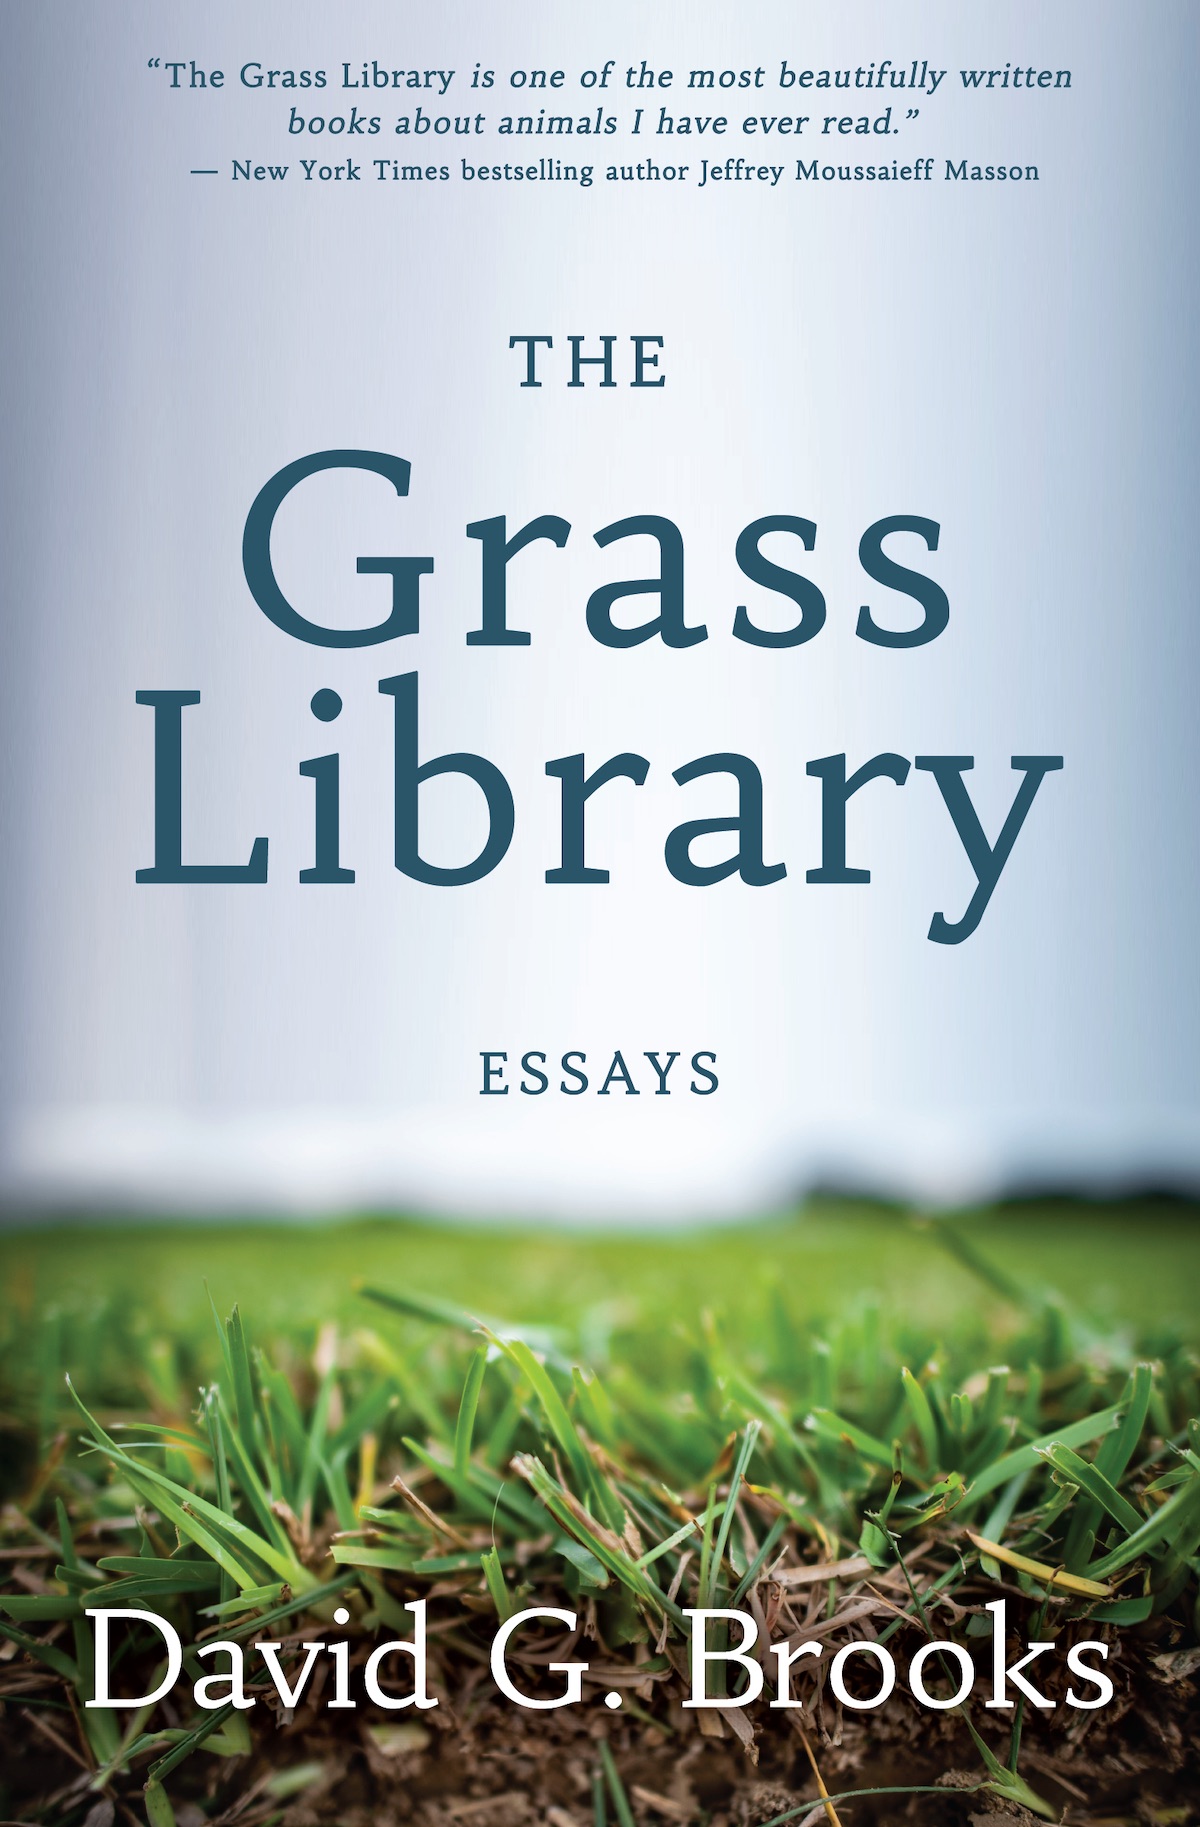 Image of The Grass Library